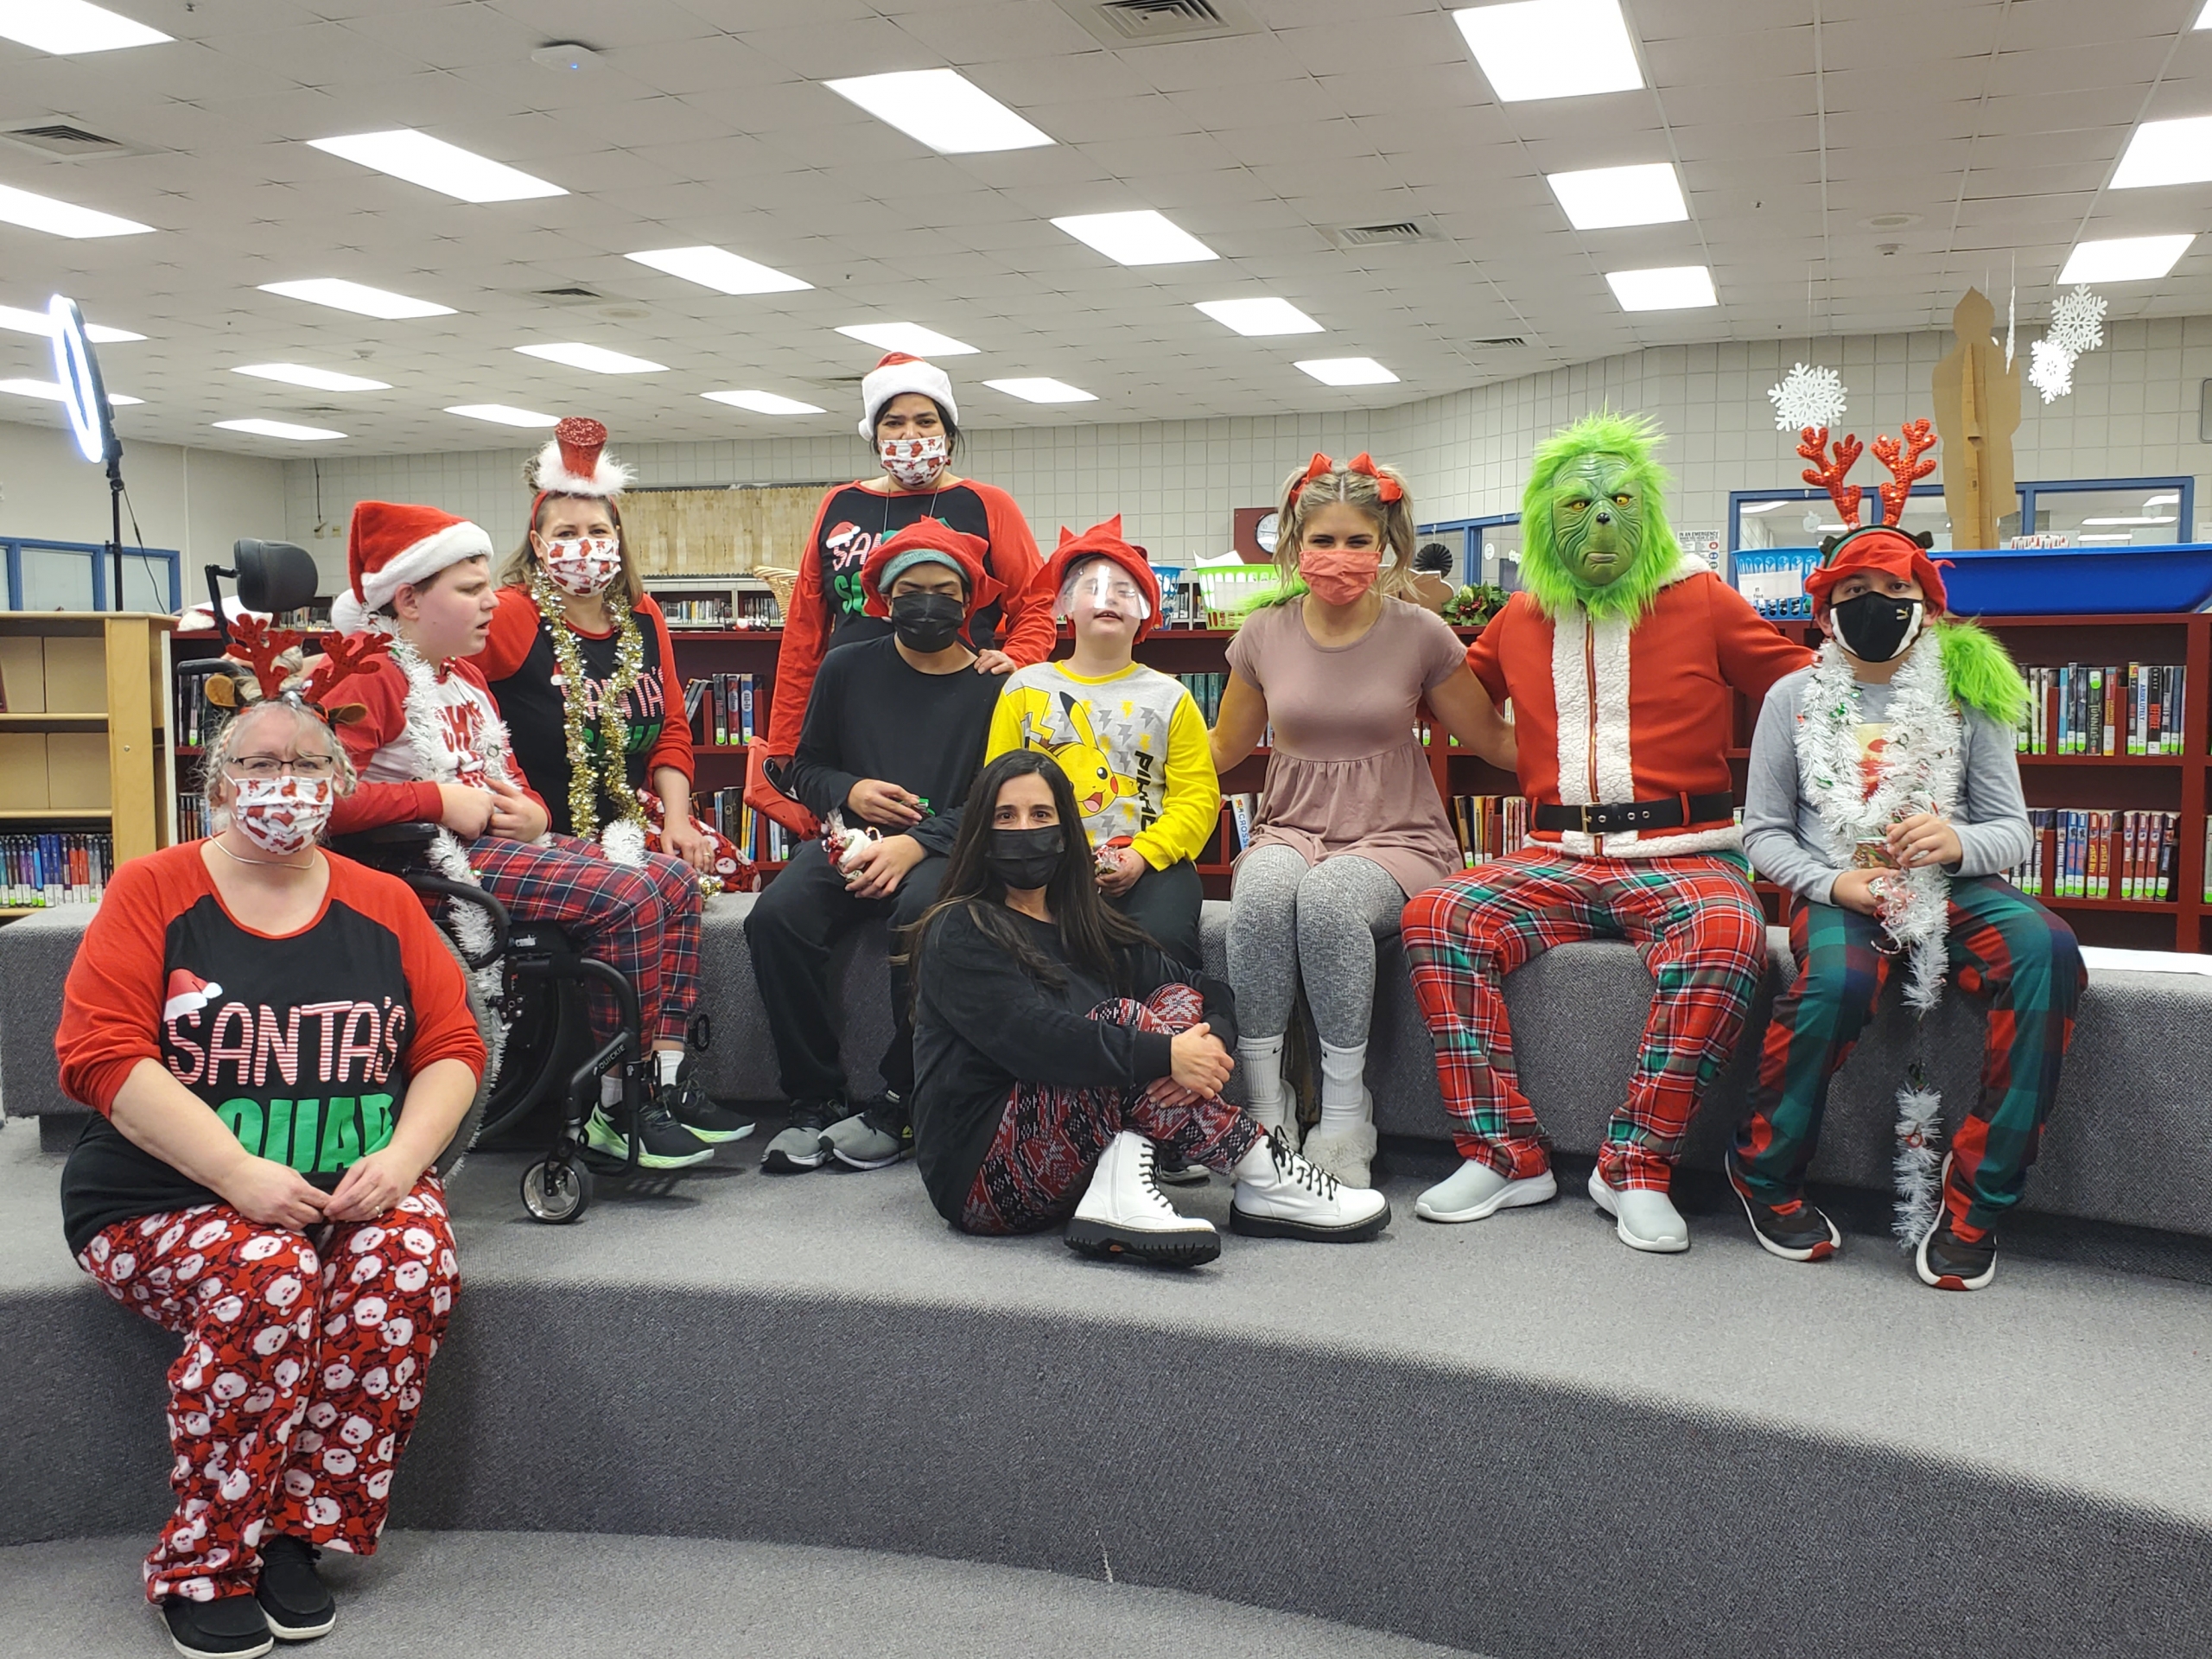 Rose Clary, Kahler librarian, brought the story, "How the Grinch Stole Christmas," to life for students in Mrs. Alessandrini's Applied Skills classroom. The Grinch was played by school principal, Mr. Newton, and Cindy Lou Who was played by math teacher, Mrs. Shreve. Under the direction of Mrs. Palasz, our 7th grade choir also performed.